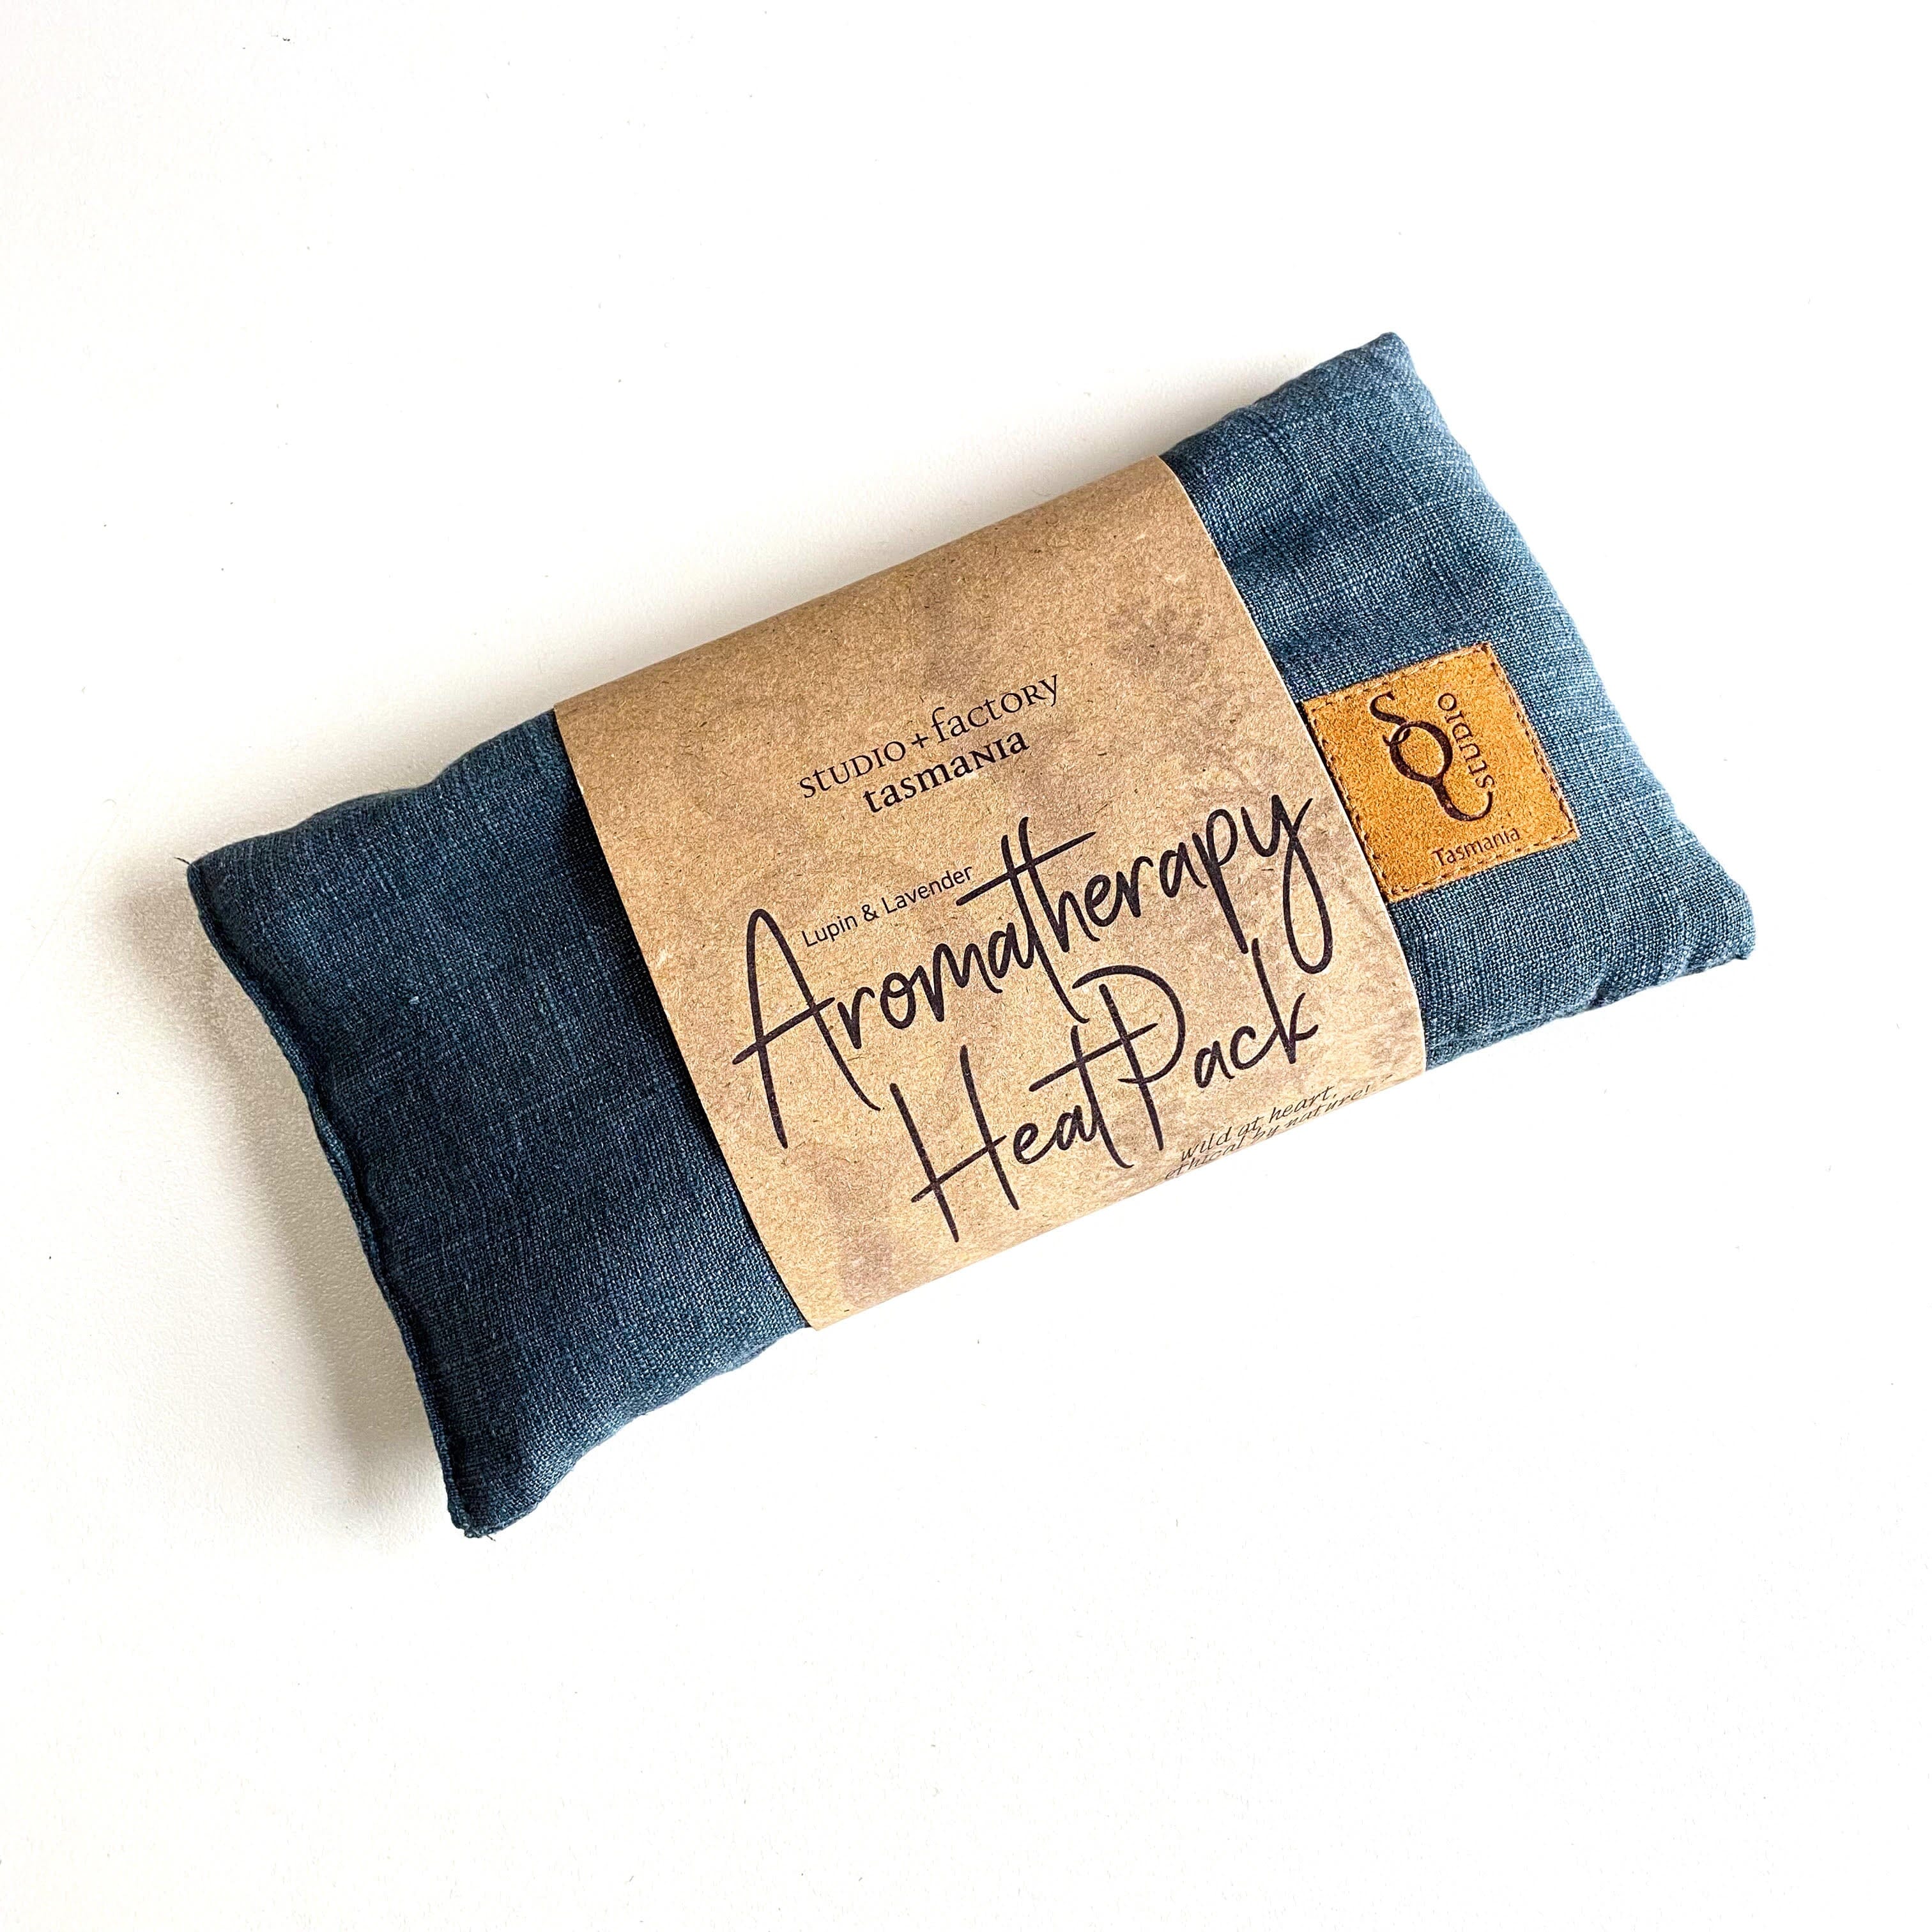 Aromatherapy Heat/Cold pack - Lupin & Lavender Heating Pads The Spotted Quoll Single Small Slate 